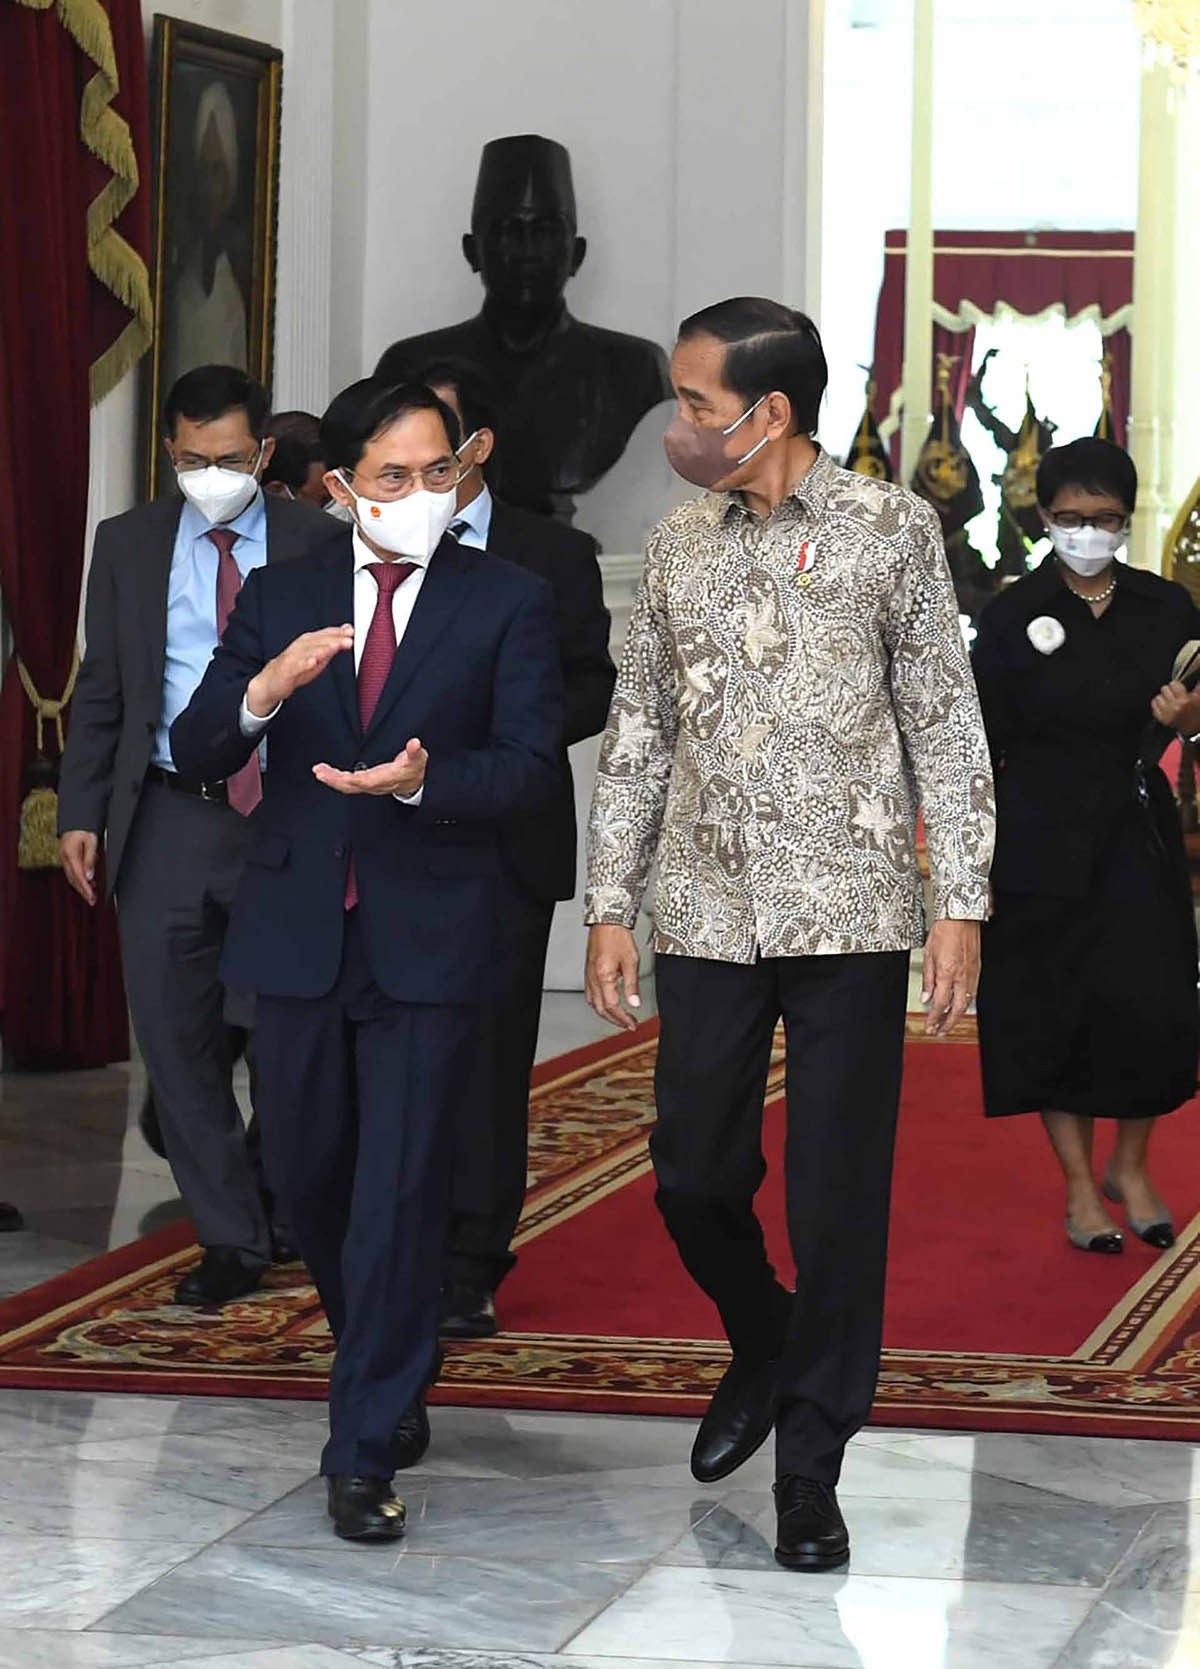 Indonesia and Viet Nam relations: True partners for development. (Photo: Indonesian Presidential Palace)